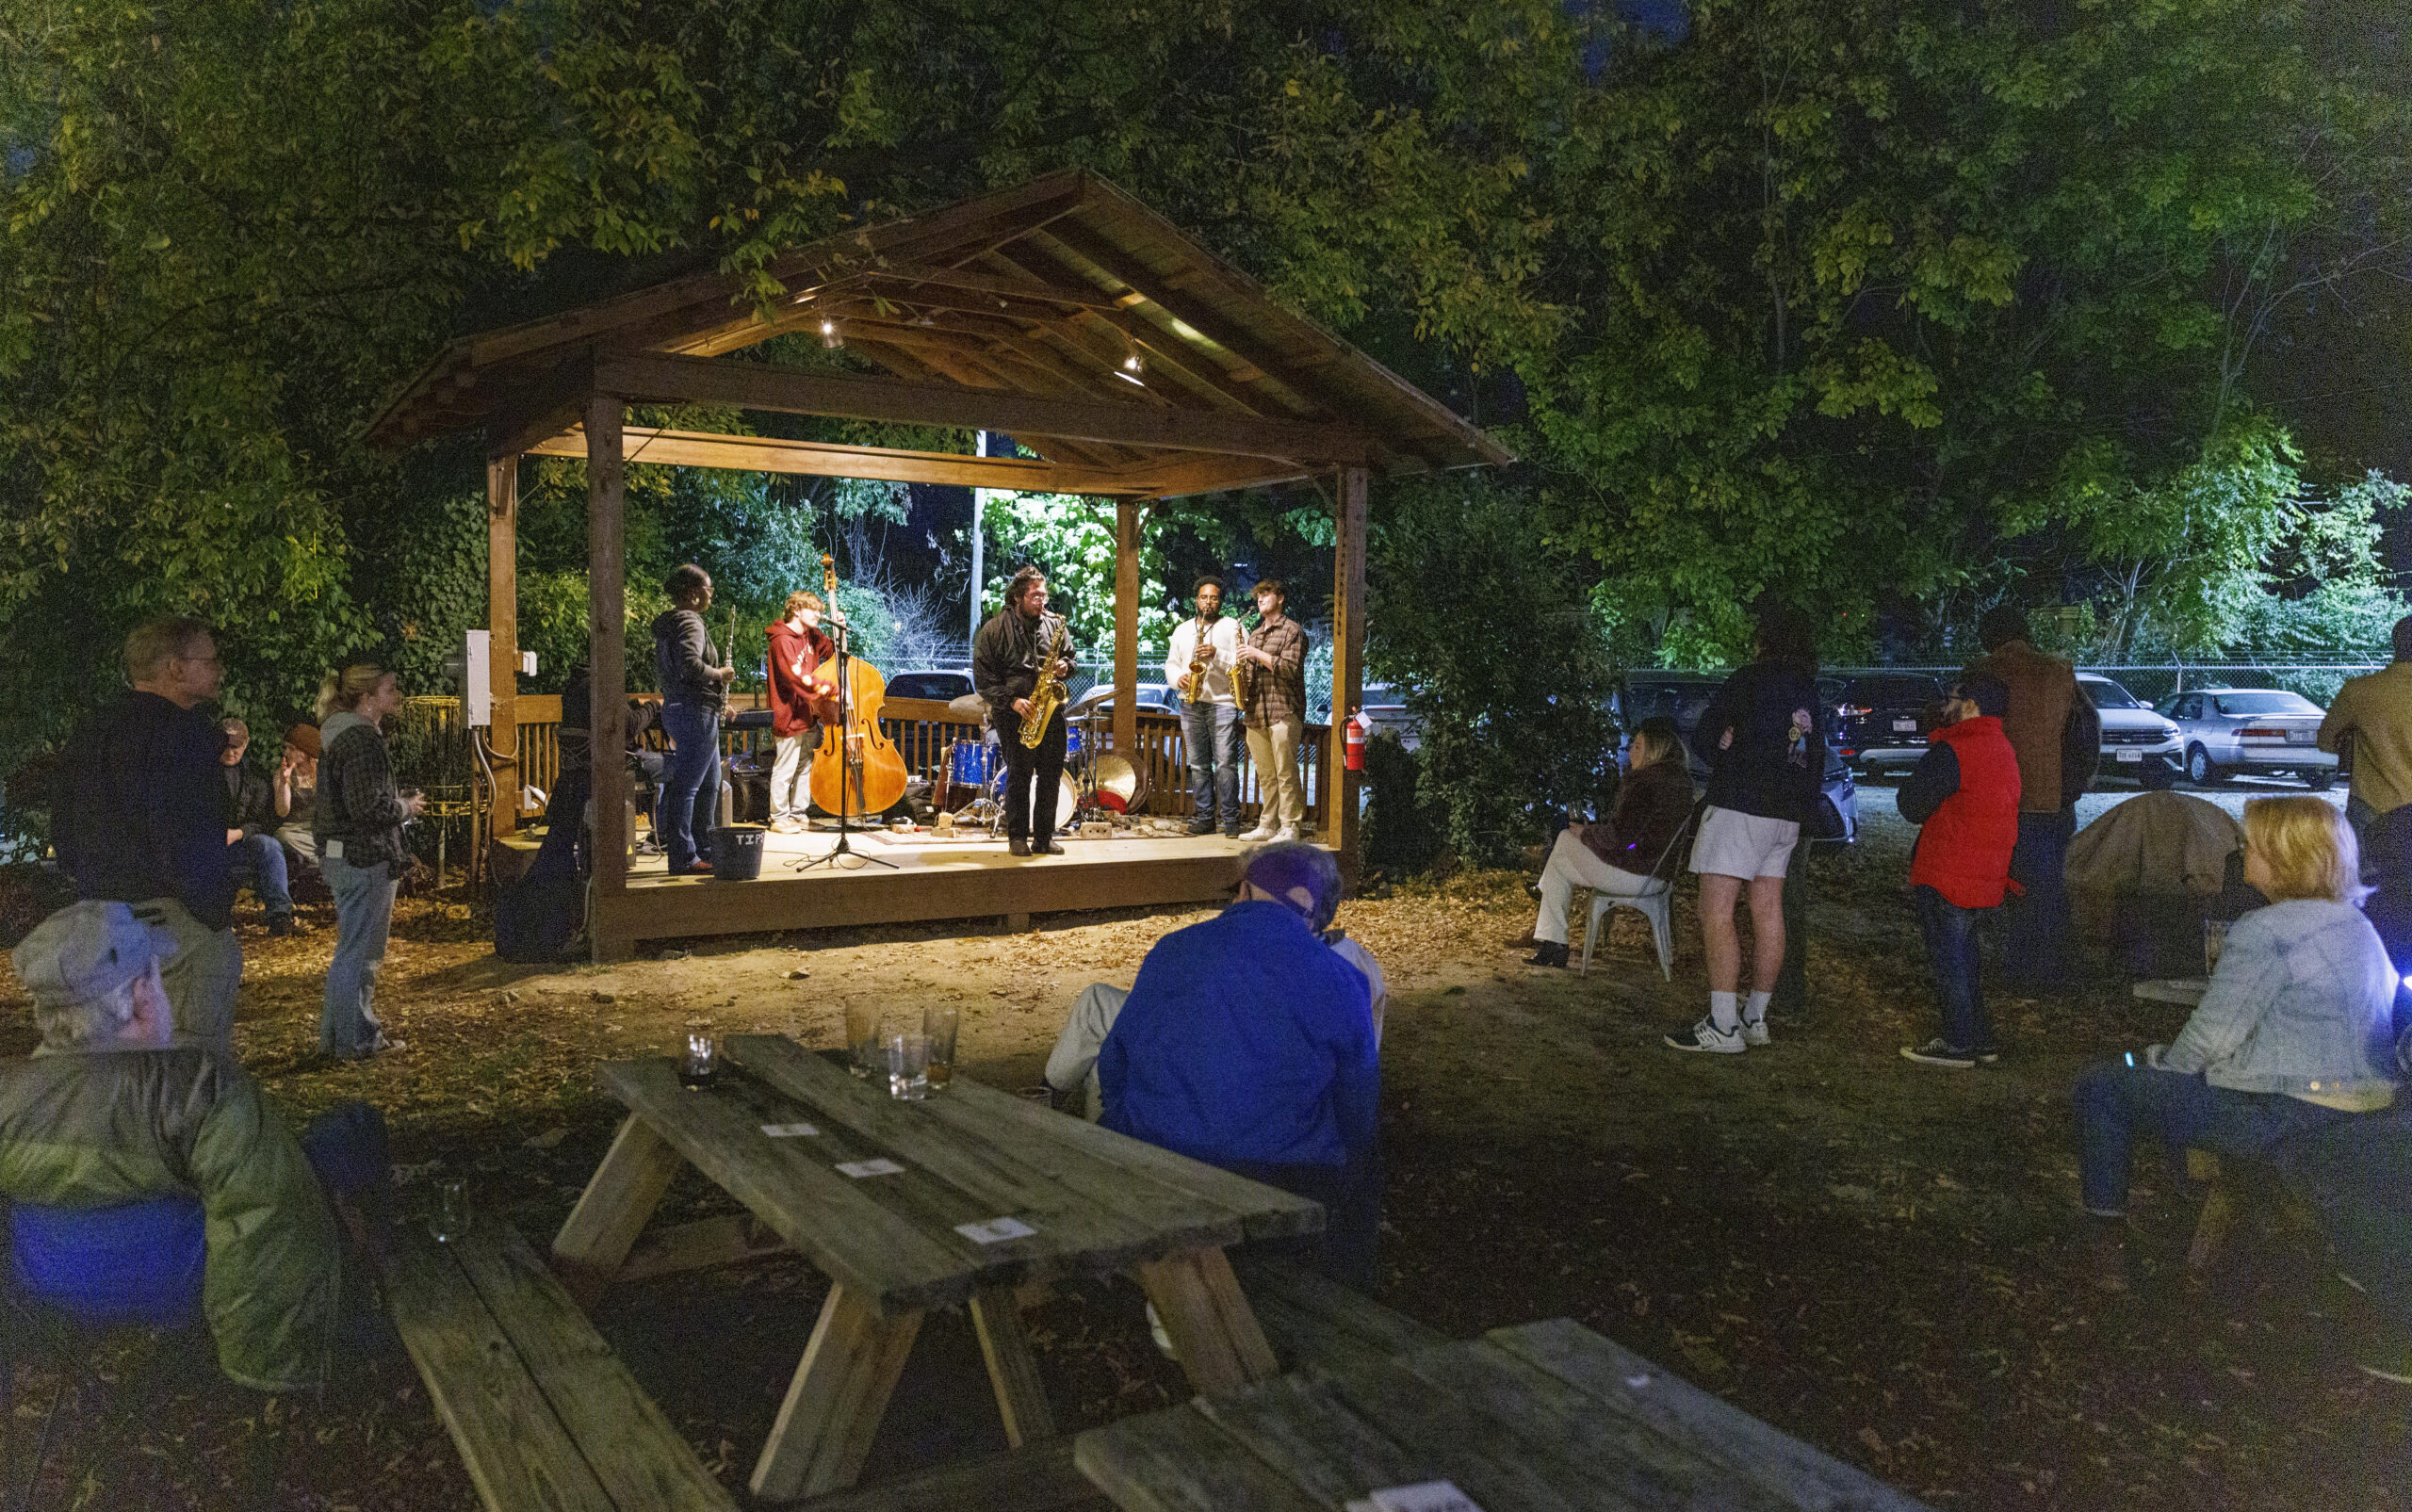 A group of UNCG students play jazz on an outdoor stage.